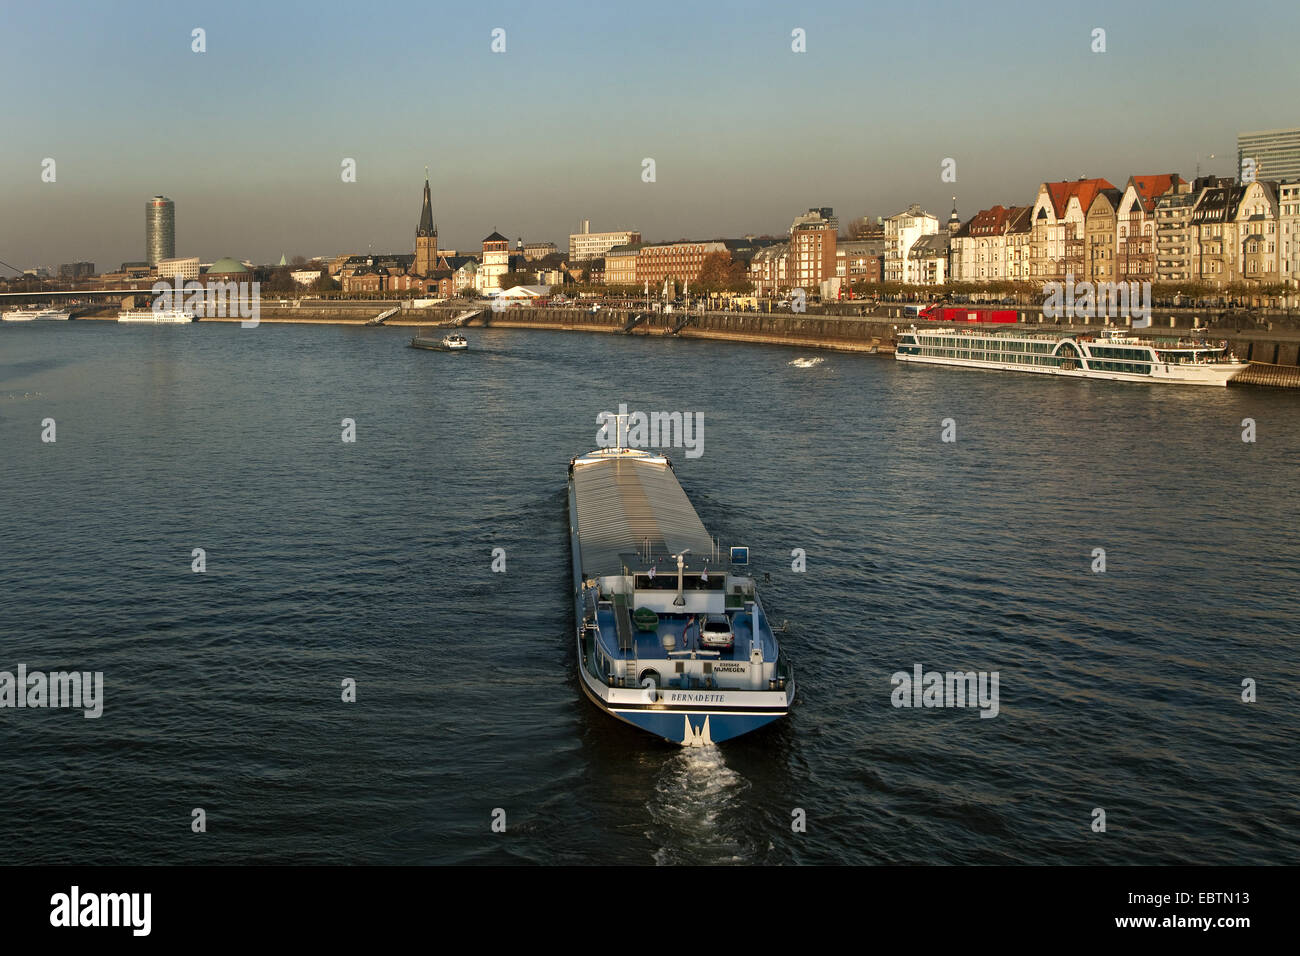 ships on Rhine river, Ergo assurance building, St. Lambertus church and castle-tower in background, Germany, North Rhine-Westphalia, Duesseldorf Stock Photo